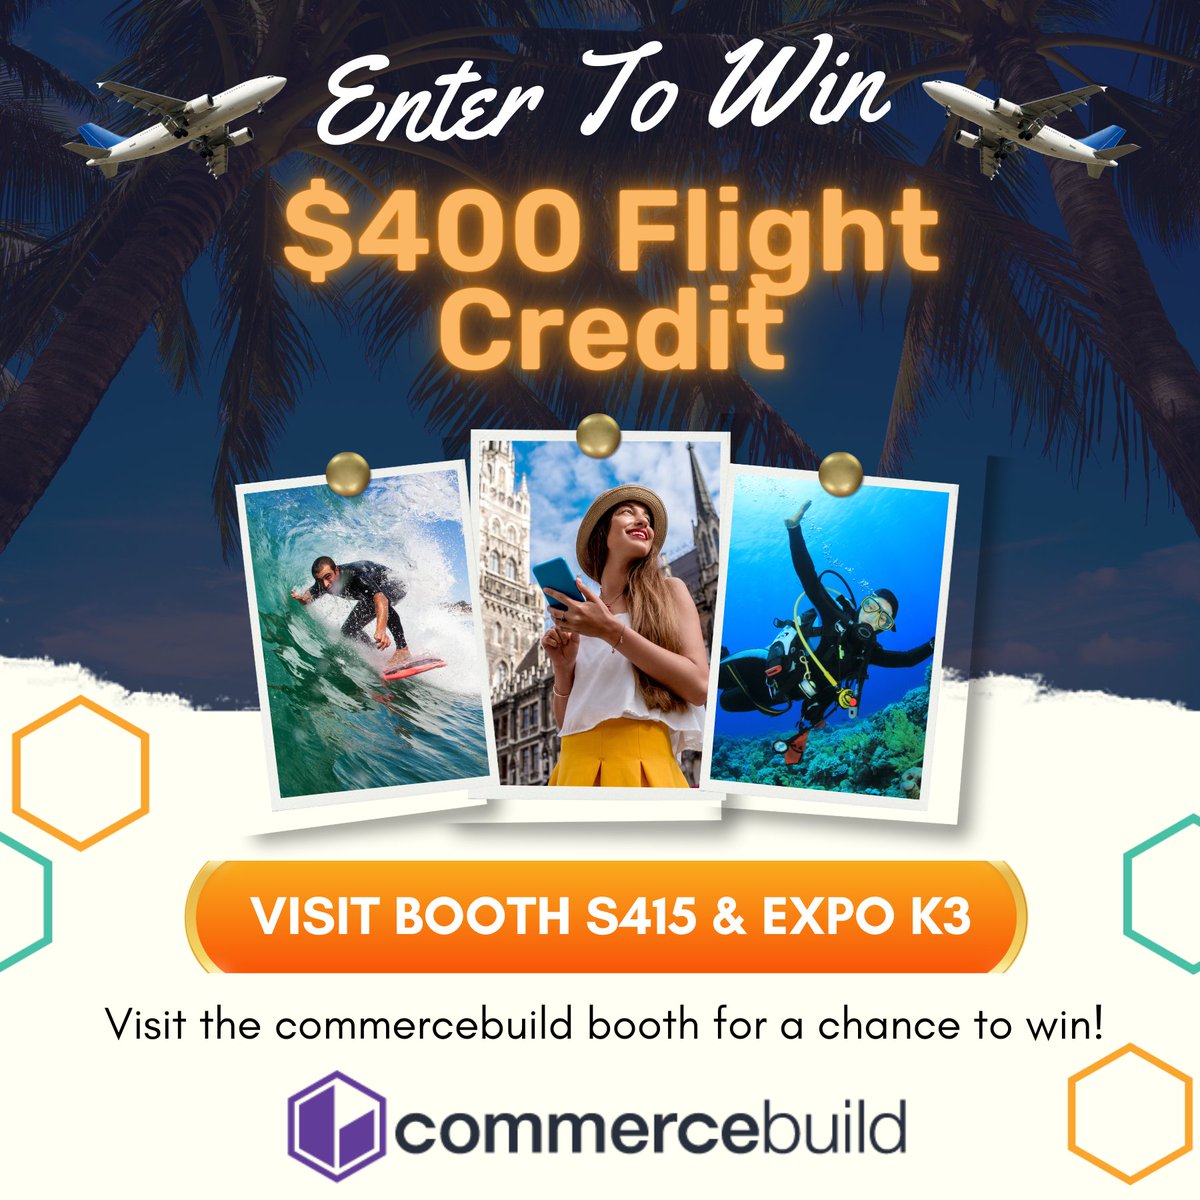 🌴✈️ Dreaming of your next getaway? Stop dreaming, start planning! Visit commercebuild at Booth S415 and Expo K3 at Directions North America for a chance to WIN a $400 flight credit!

Swing by and we’ll fill you in on how to enter.

#directionsna2024 #msdyn365bc #msdyn365